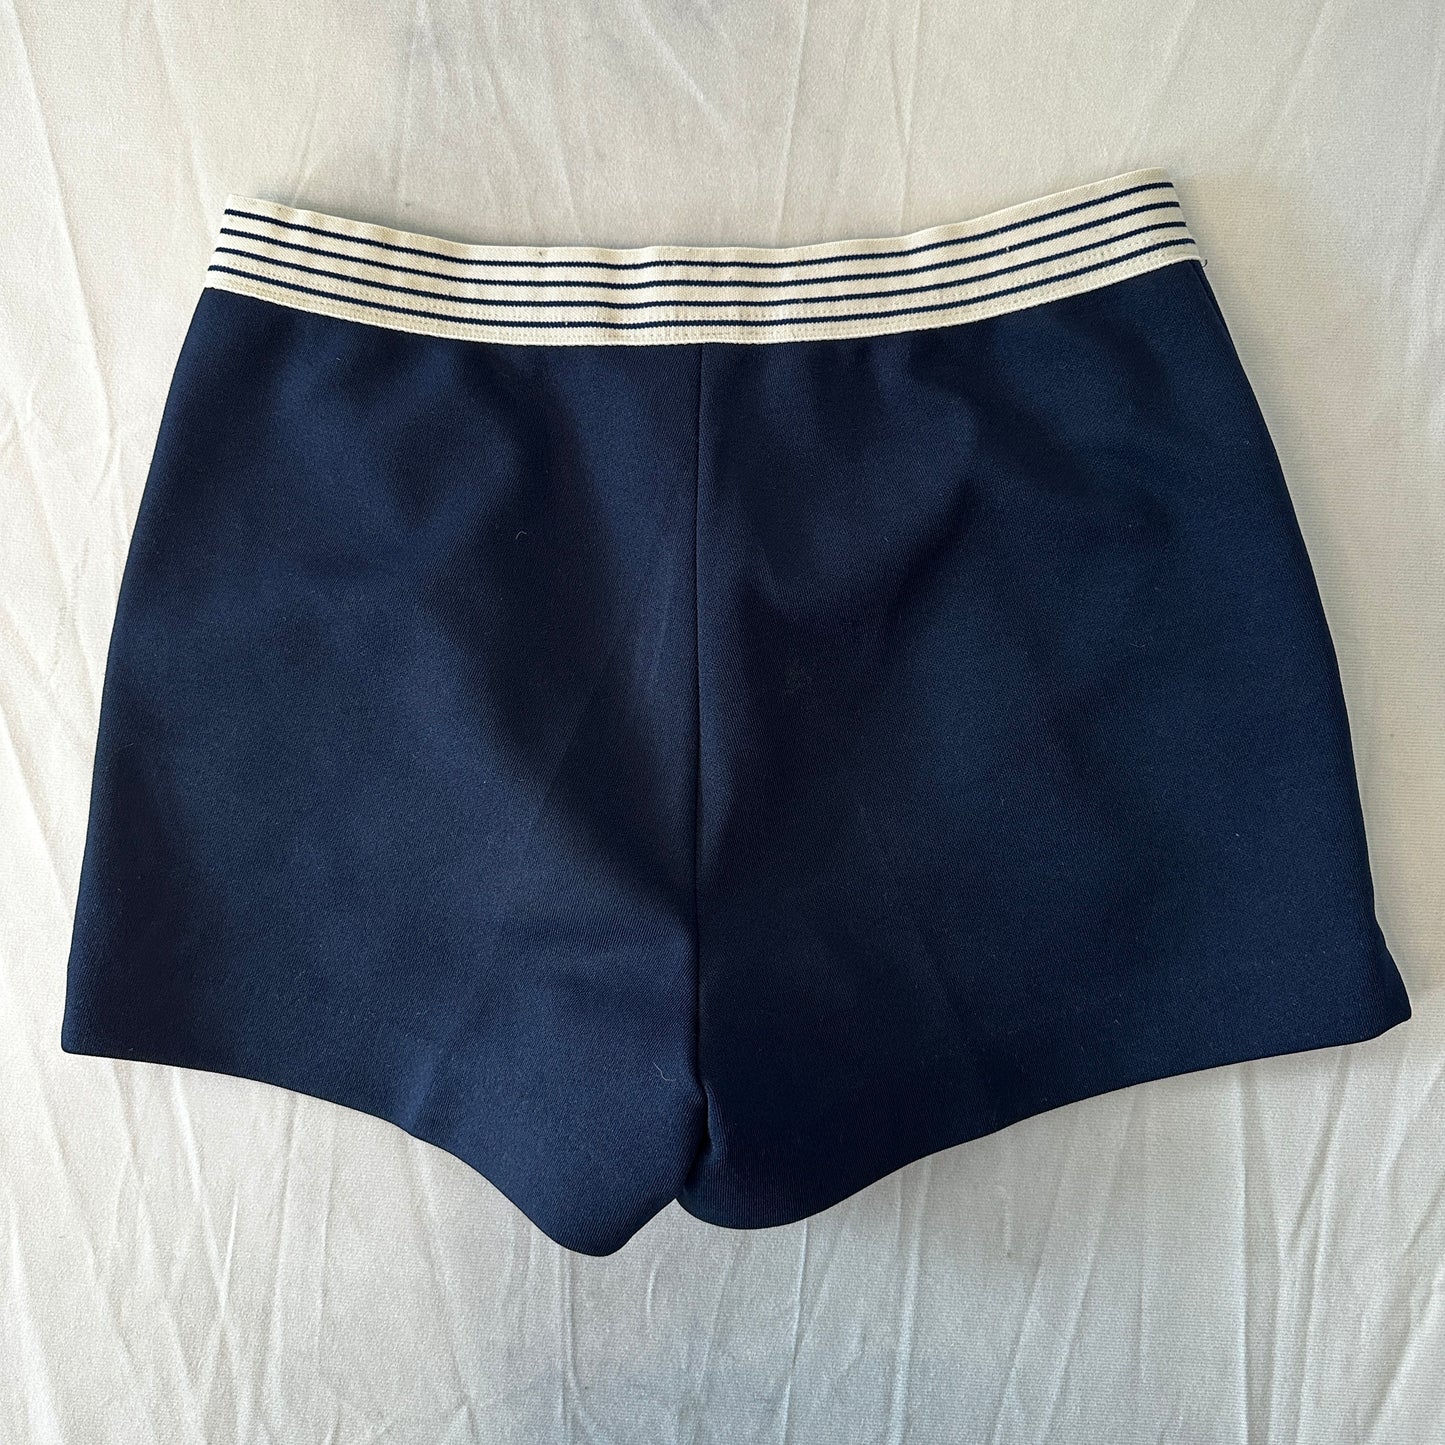 Grosso Martin Vintage 80s Tennis Shorts - S - Made in France